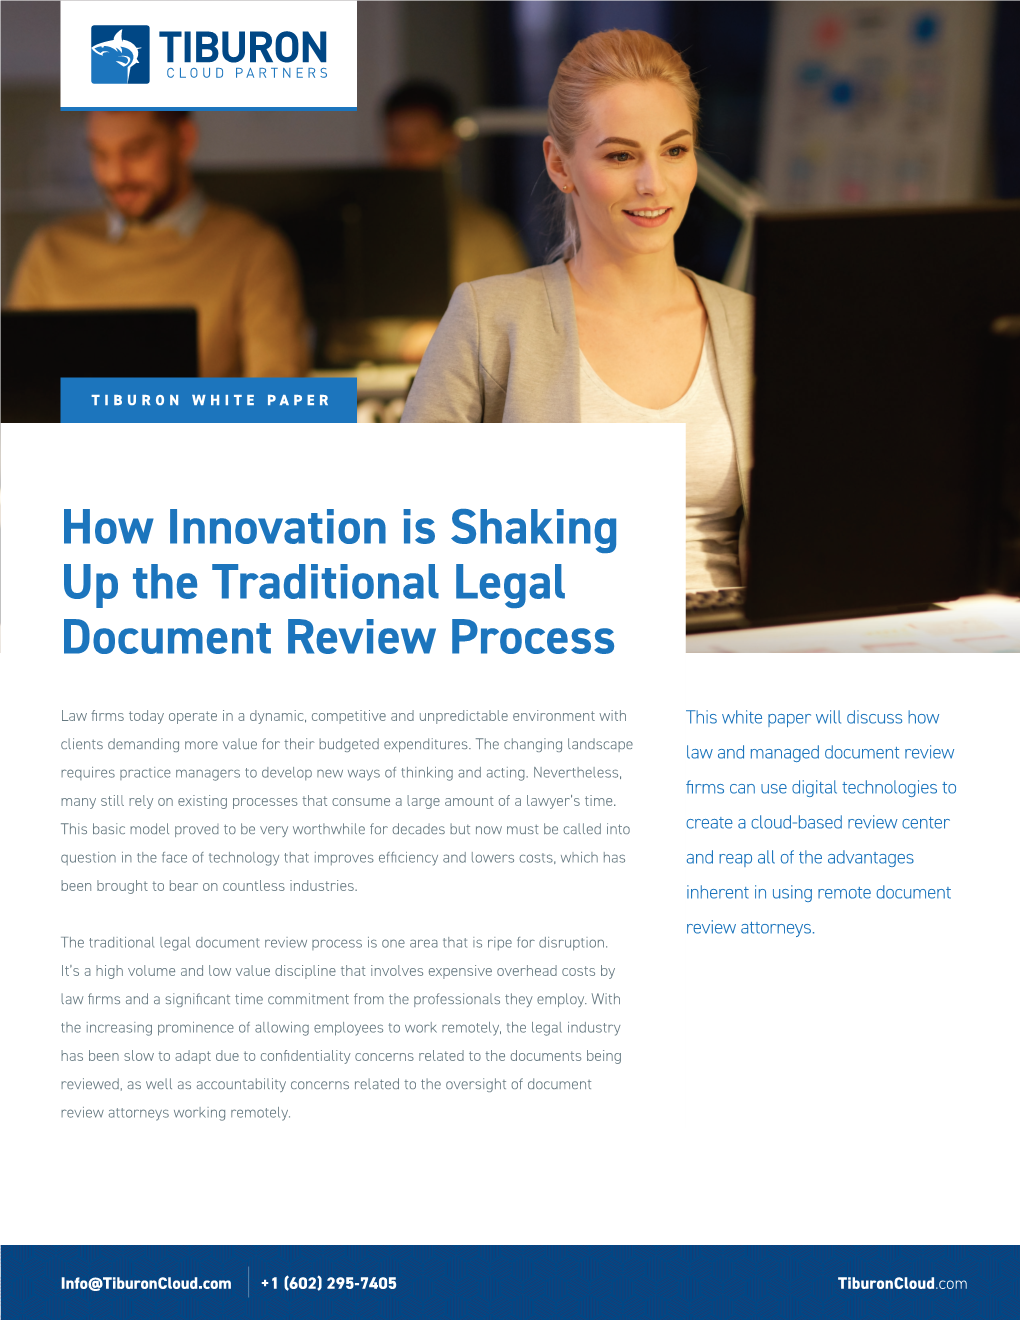 How Innovation Is Shaking up the Traditional Legal Document Review Process